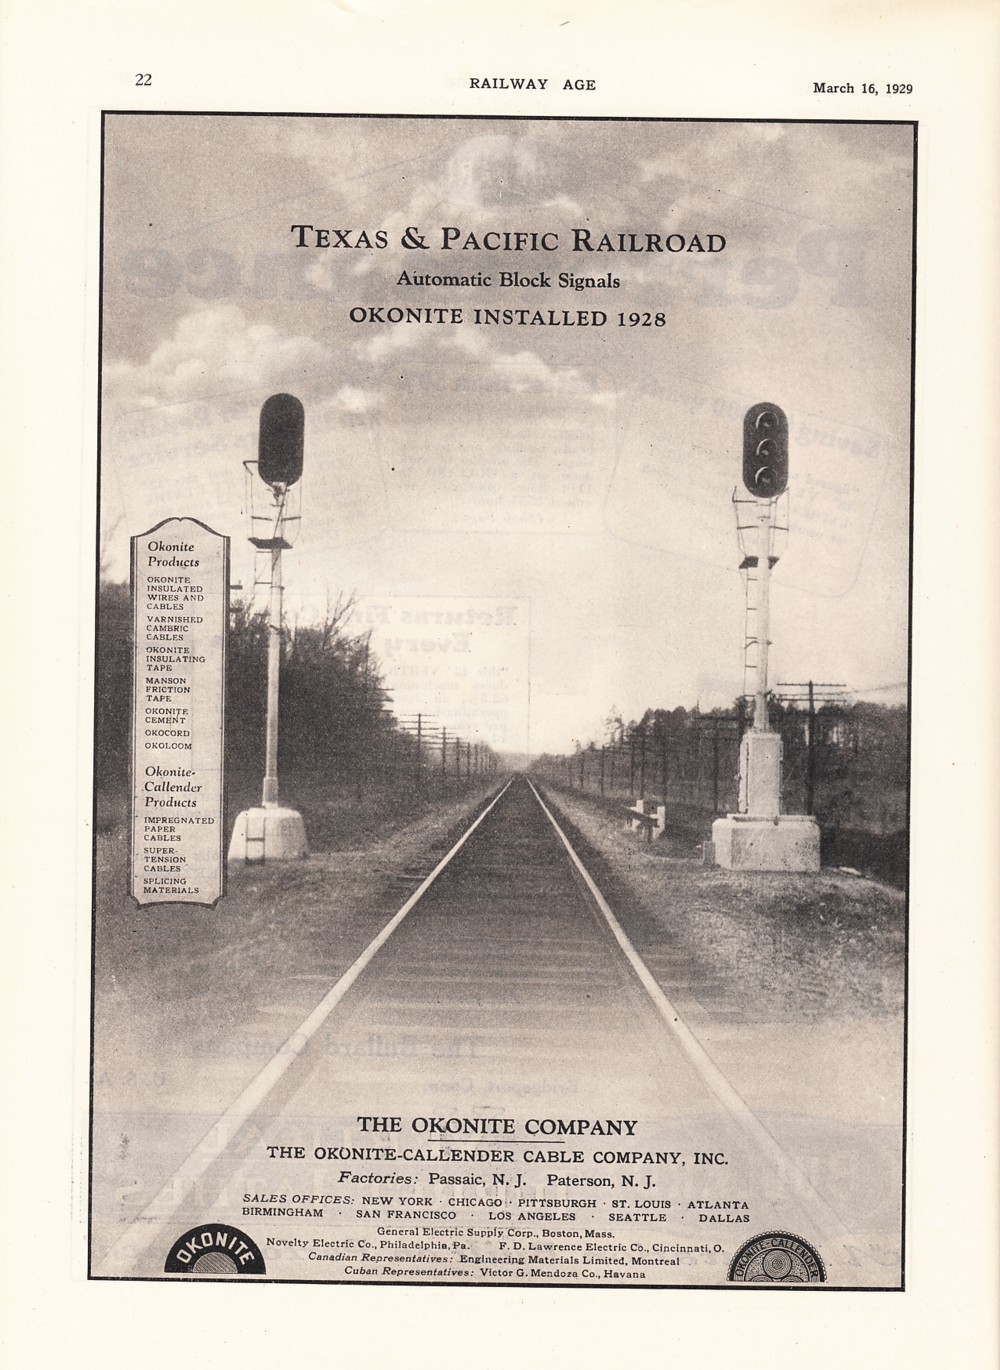 Image of T&P  Advertisements - Texas & Pacific Railroad - Automatic Block Signals - Okonite isntalled 1928